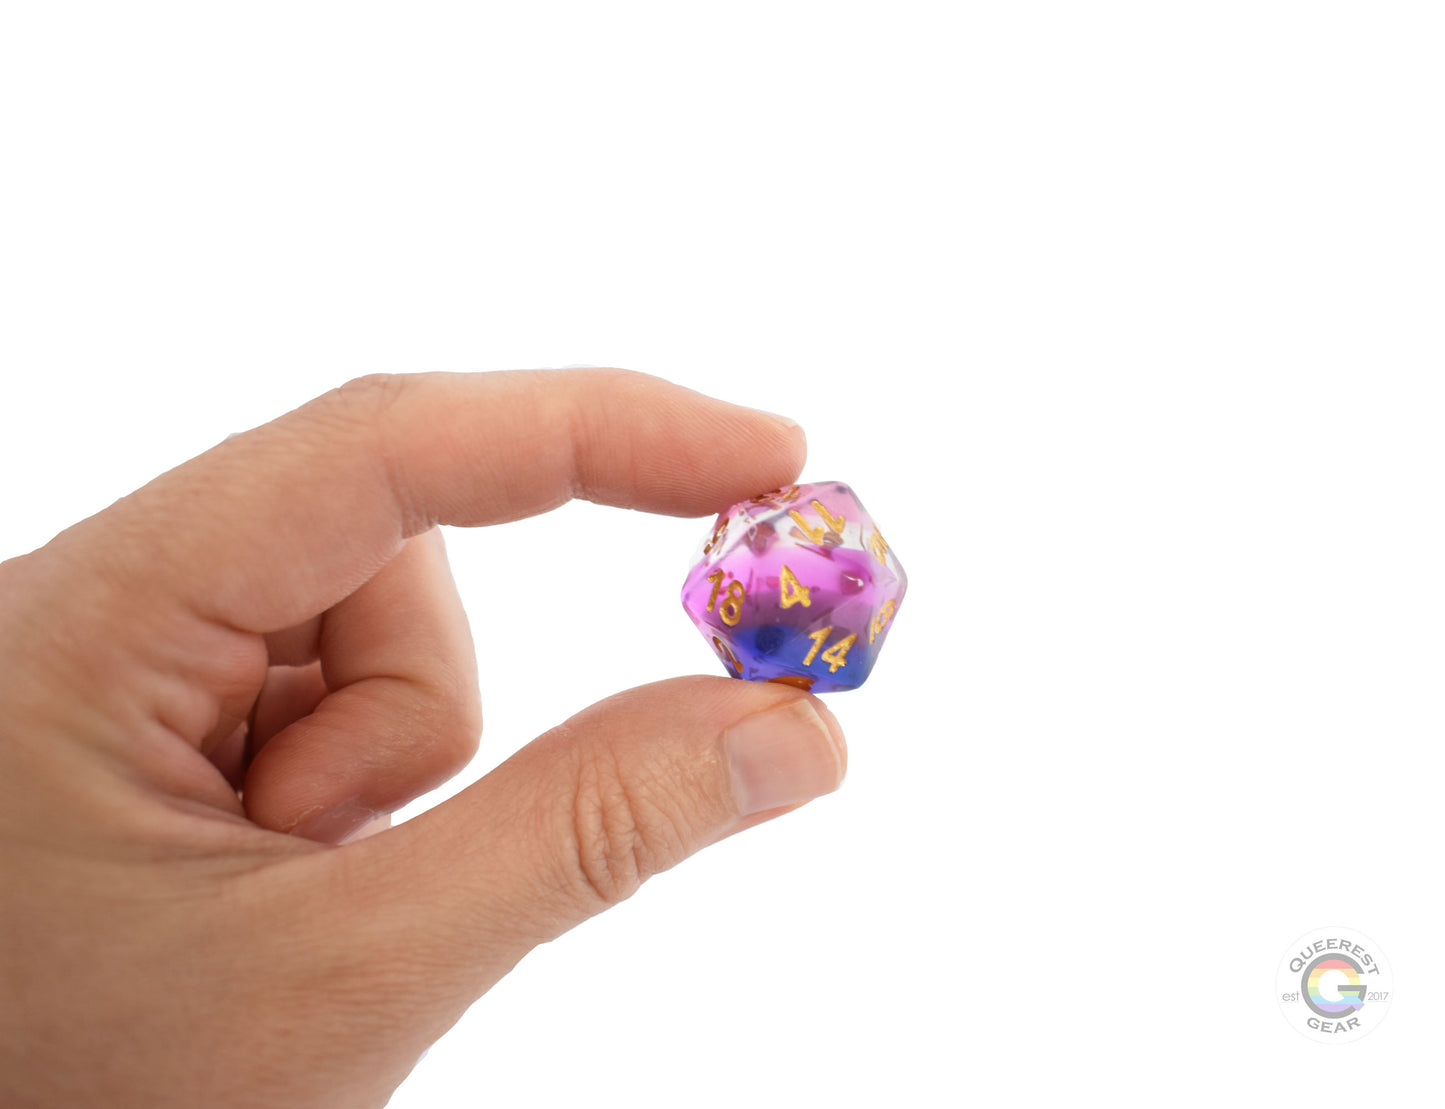 A hand holding up the genderfluid d20 to show off the color and transparency